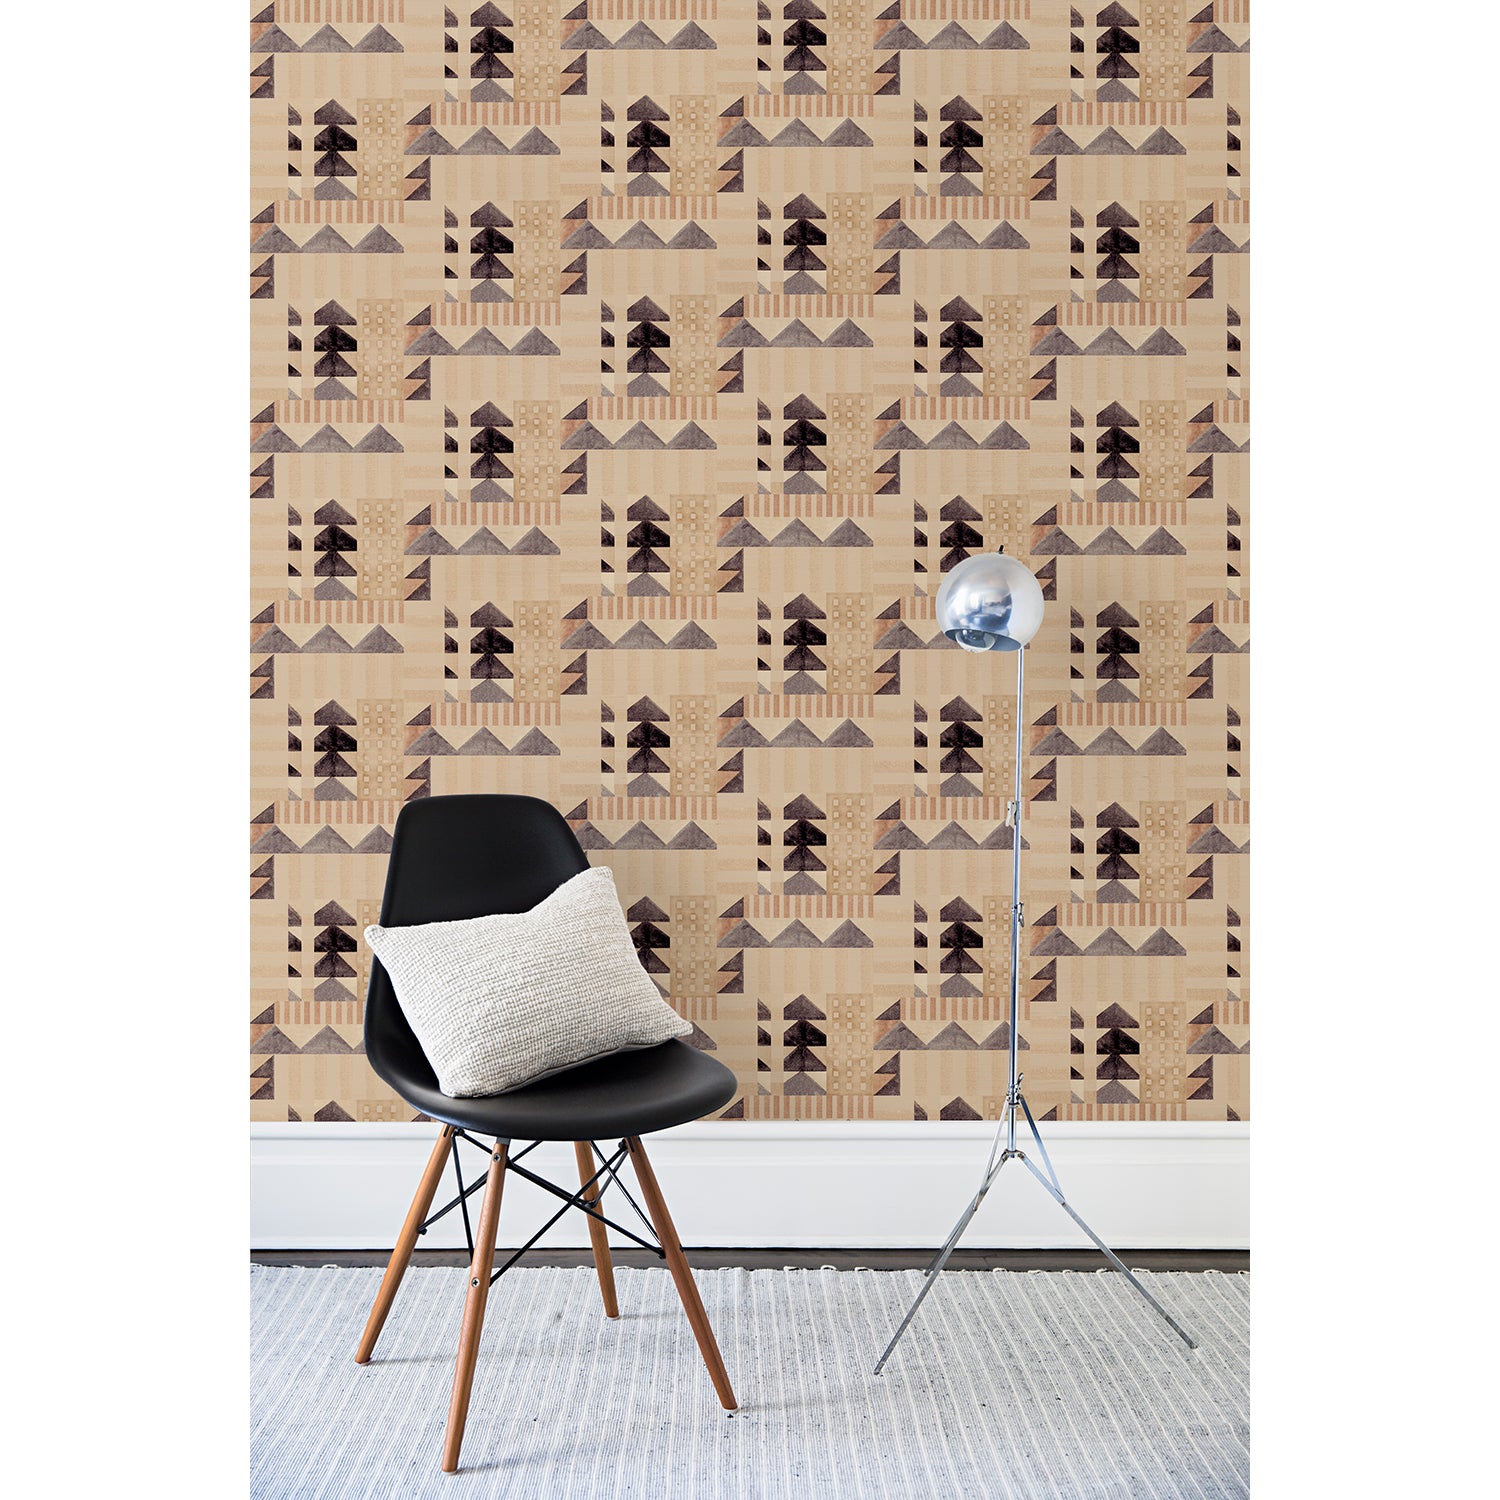 Partially unrolled wallpaper roll with layered geometric shapes in shades of black, beige and rust printed on a tan background.